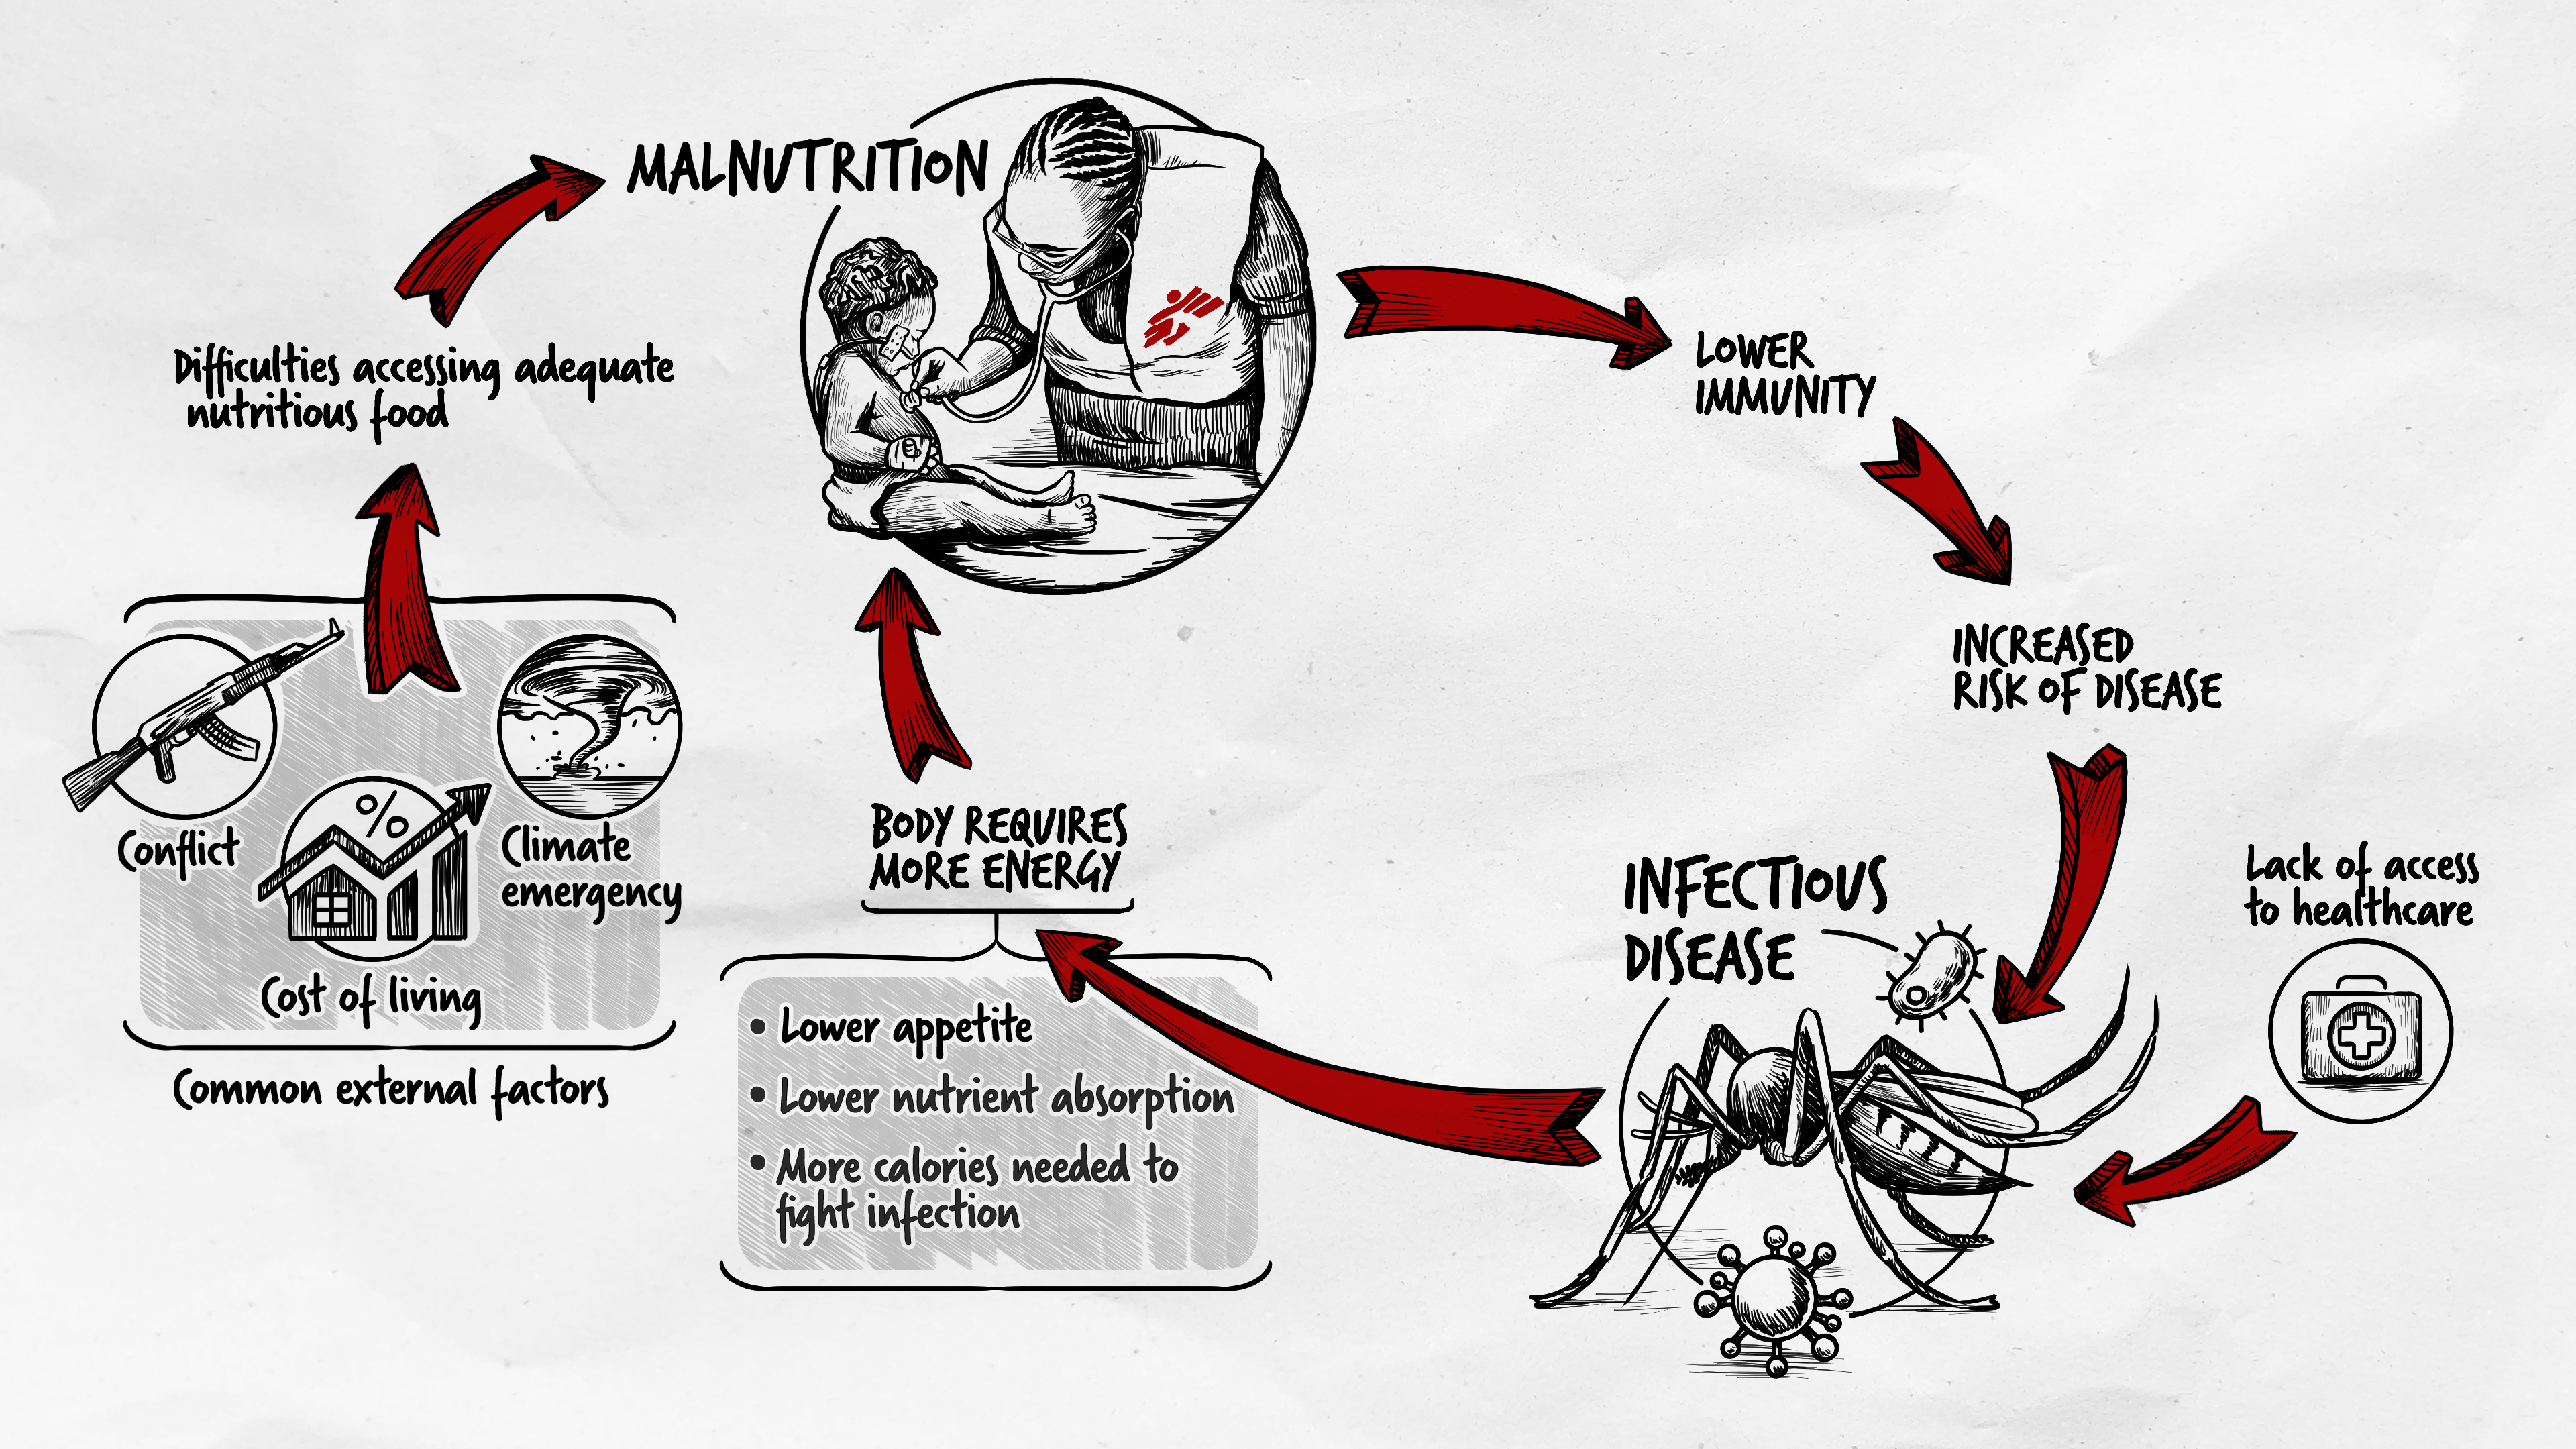 An infographic showing the malnutrition cycle.